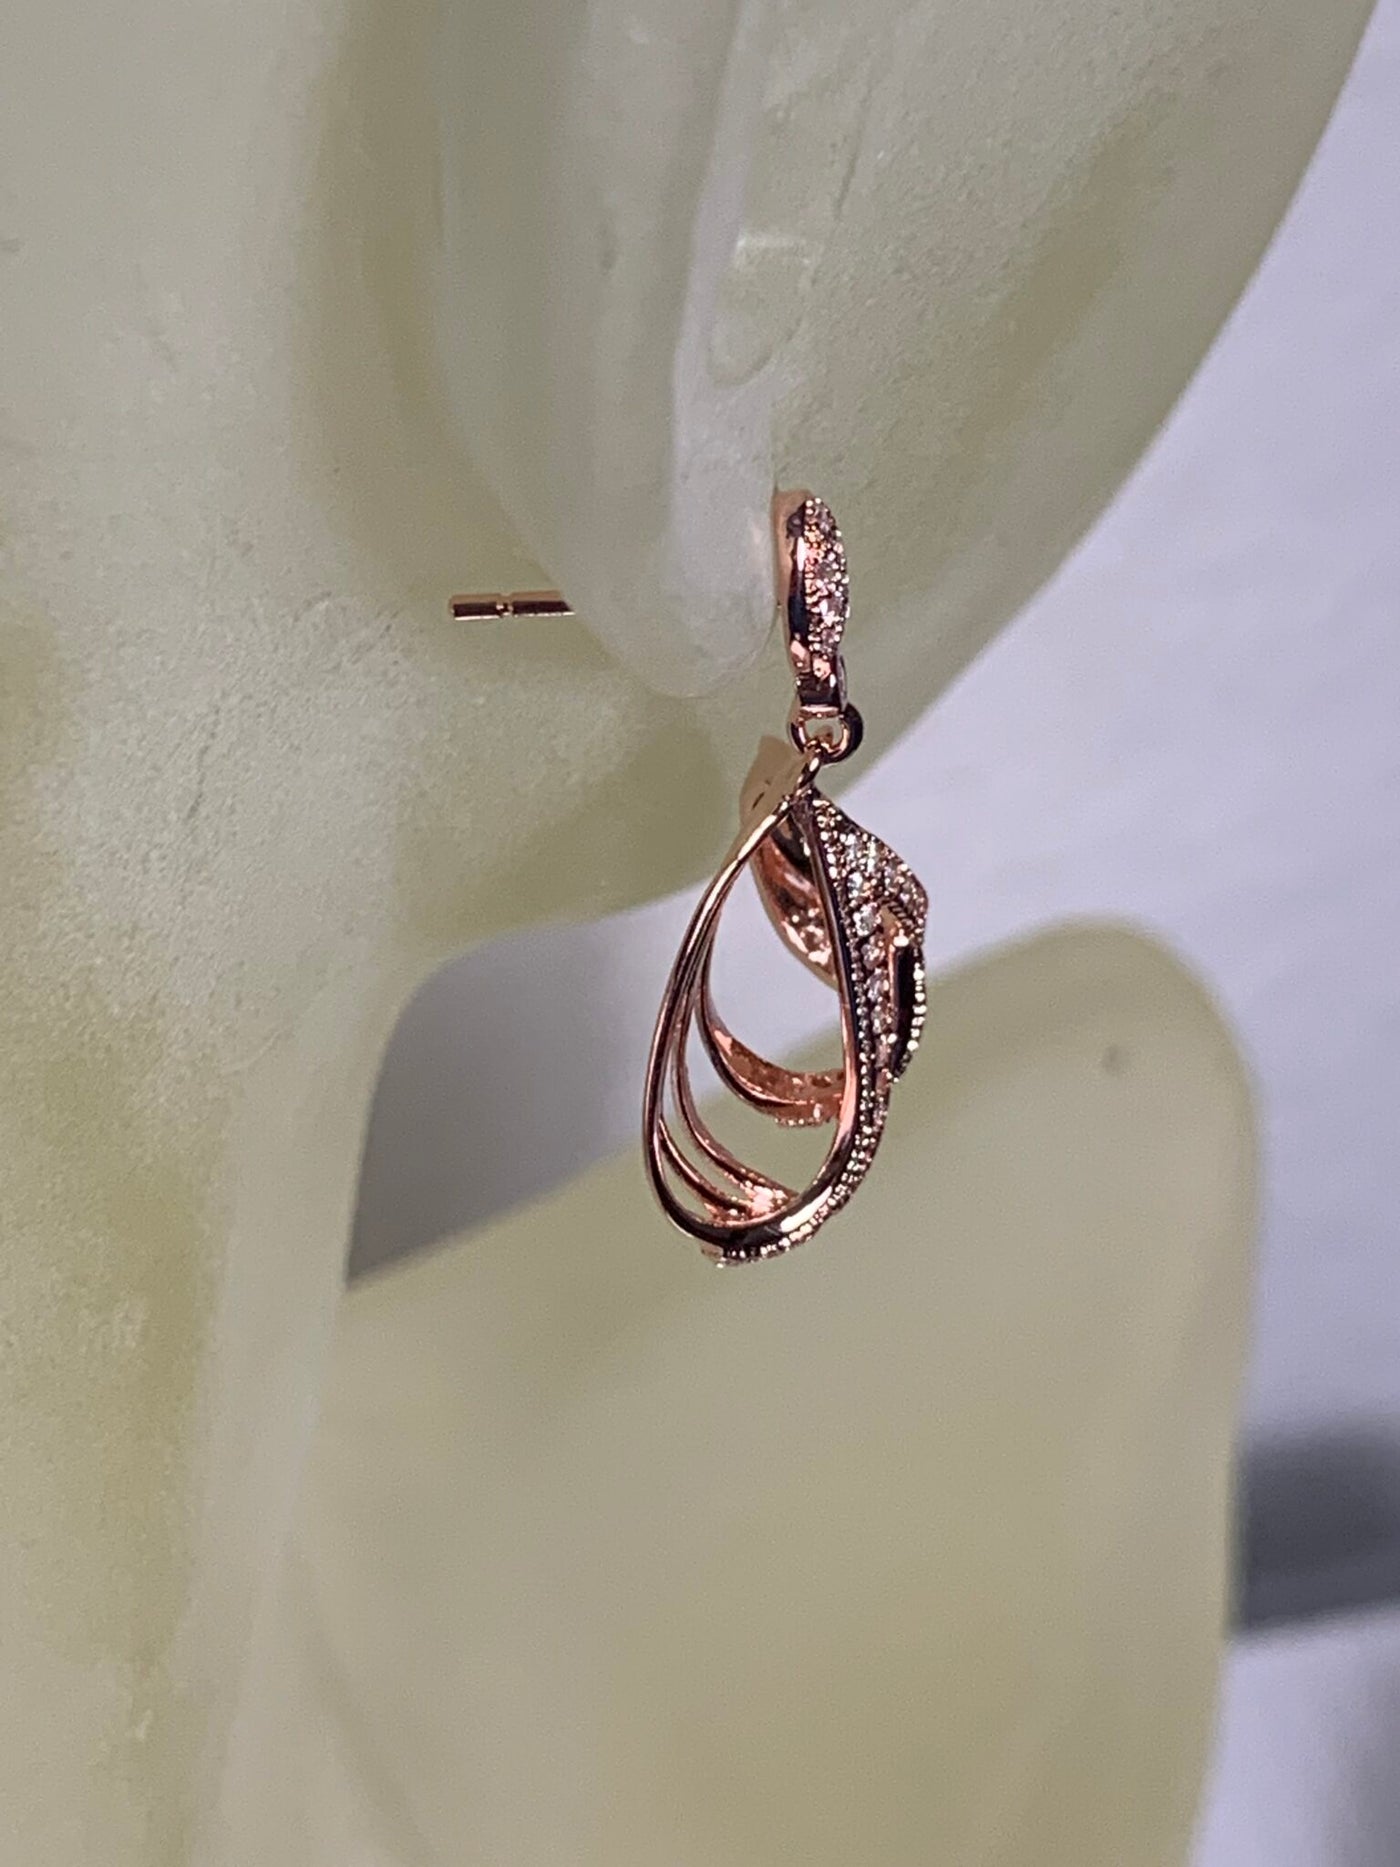 Rose Gold Tone Dangling Basket Earrings with Pave Set Cubic Zirconia